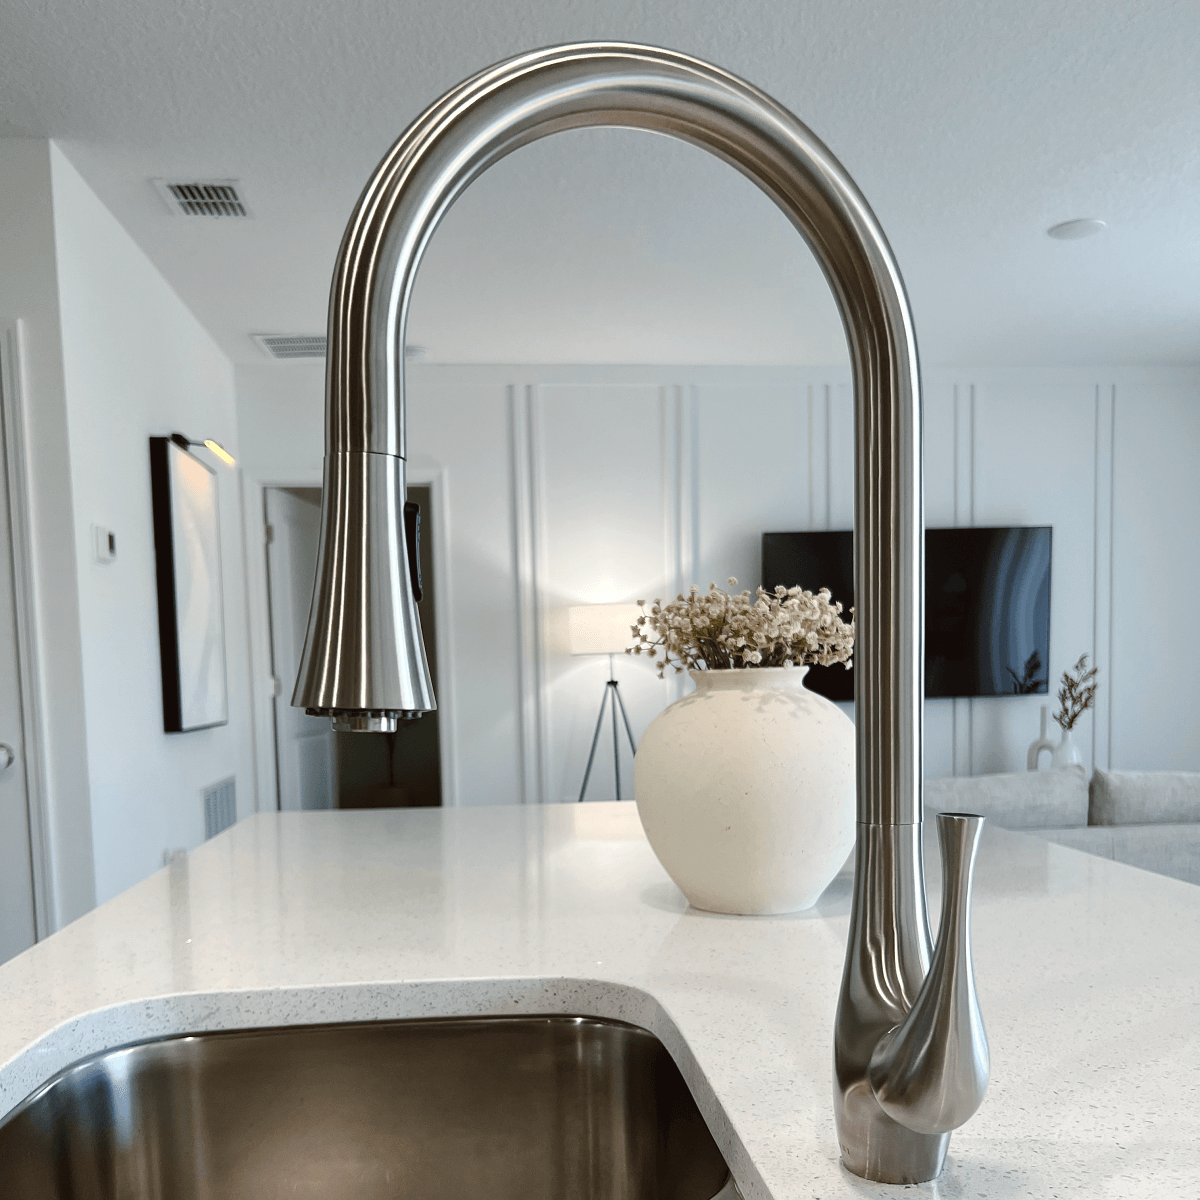 Lulani Yasawa Brushed Stainless Steel 1.8 GPM Single Handle 2-Function Pull-Down Spray Head 360 Swivel Spout Faucet With Baseplate